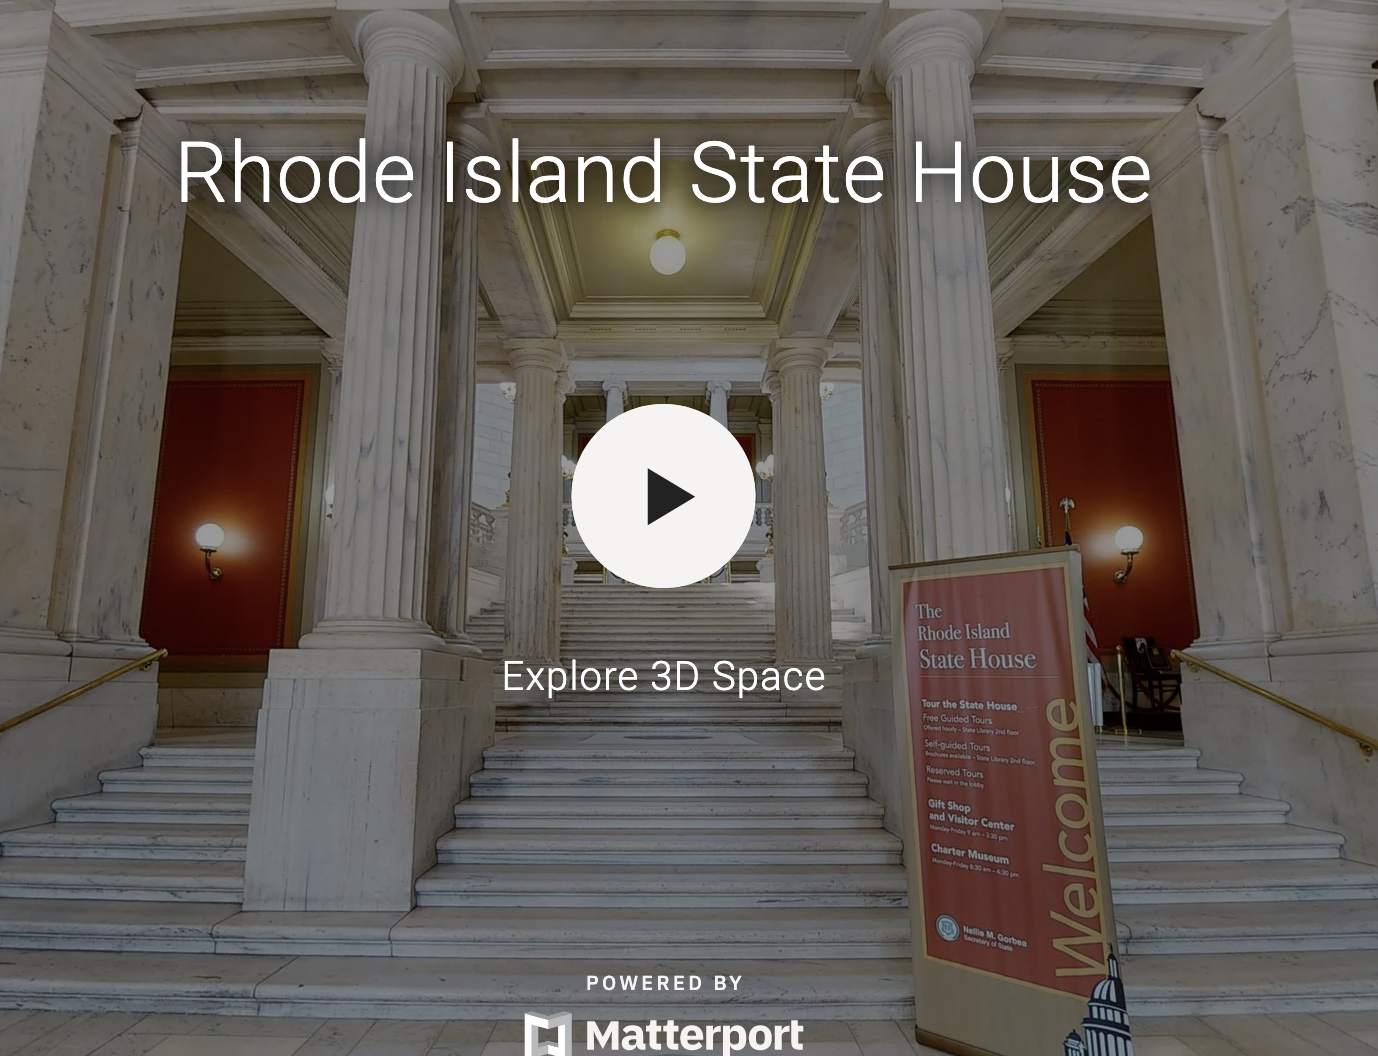 Tour the Rhode Island State House in 3D